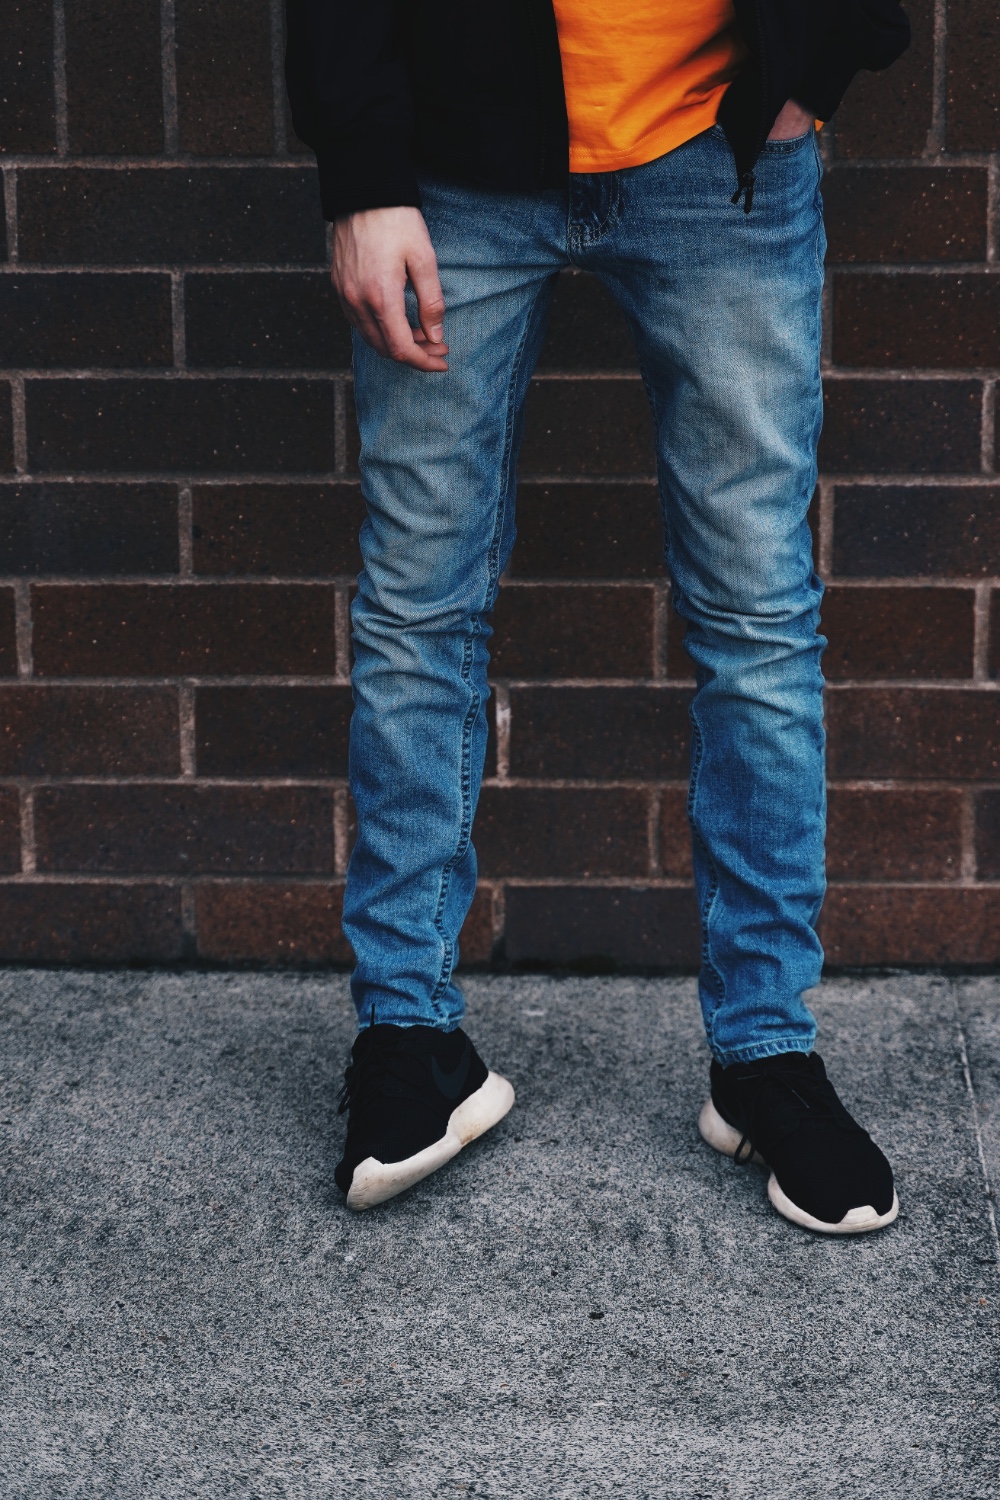 Man in Jeans